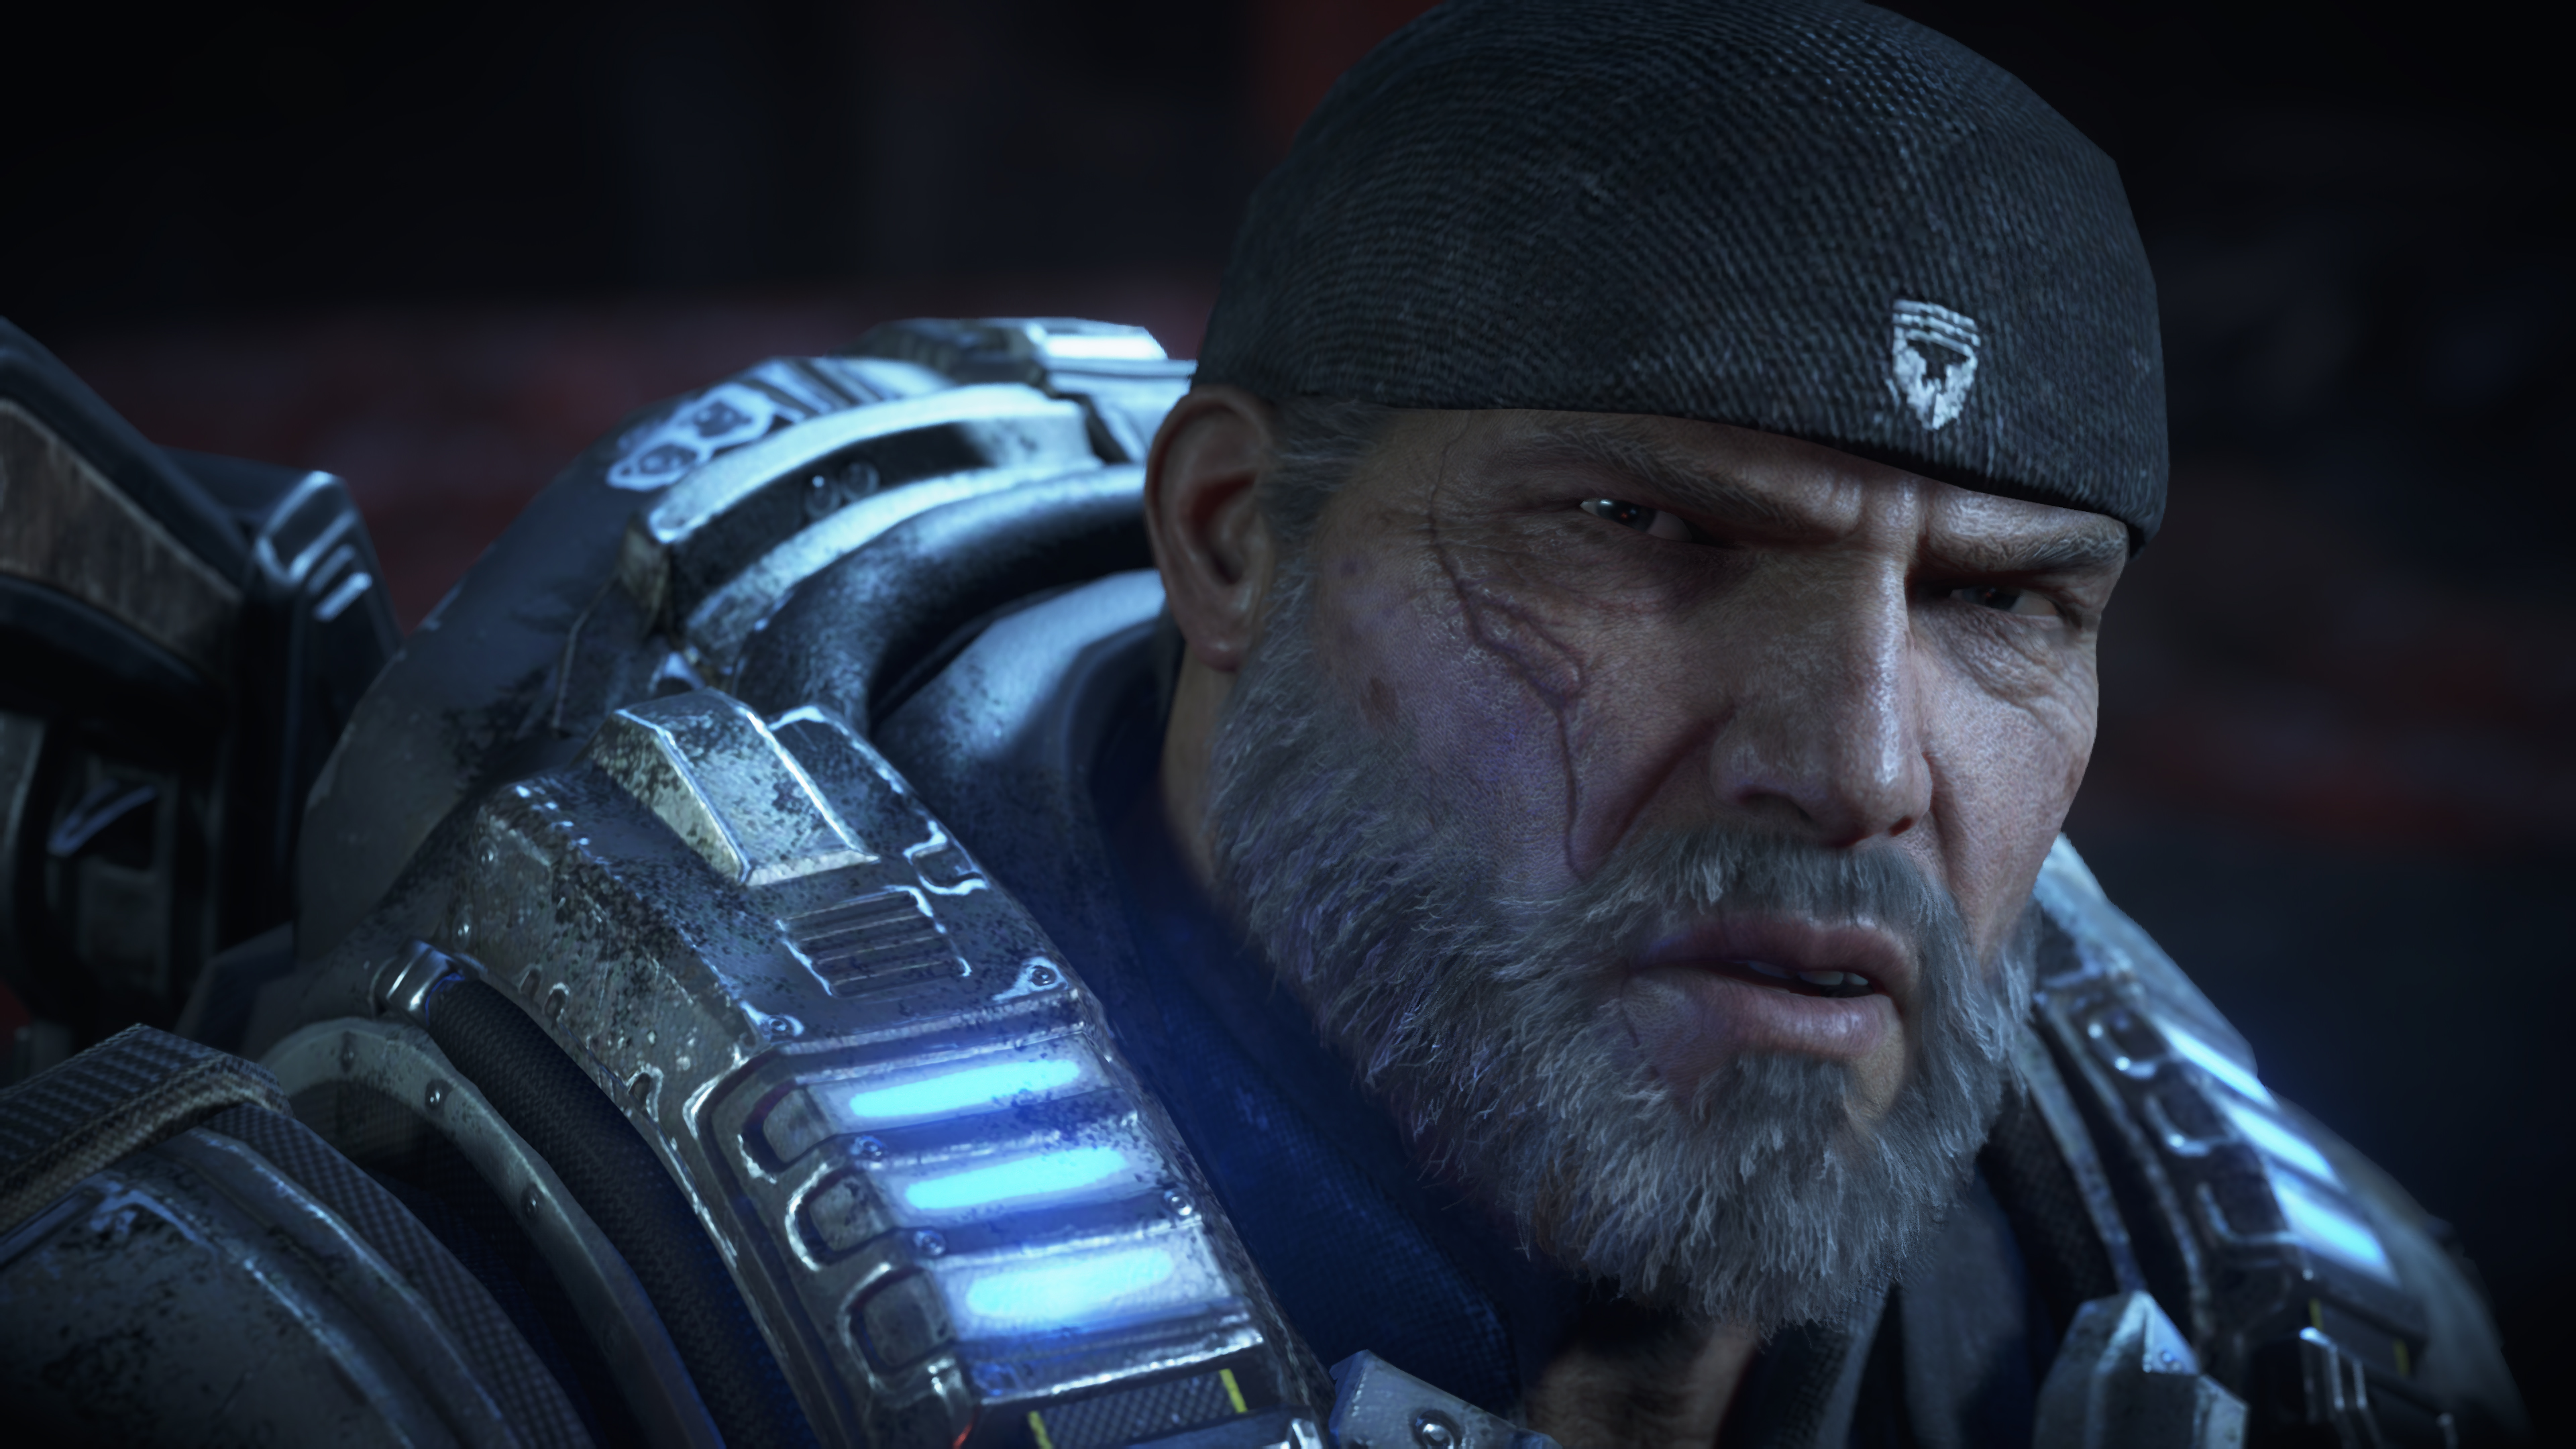 Homecoming: Gears of War 4 review